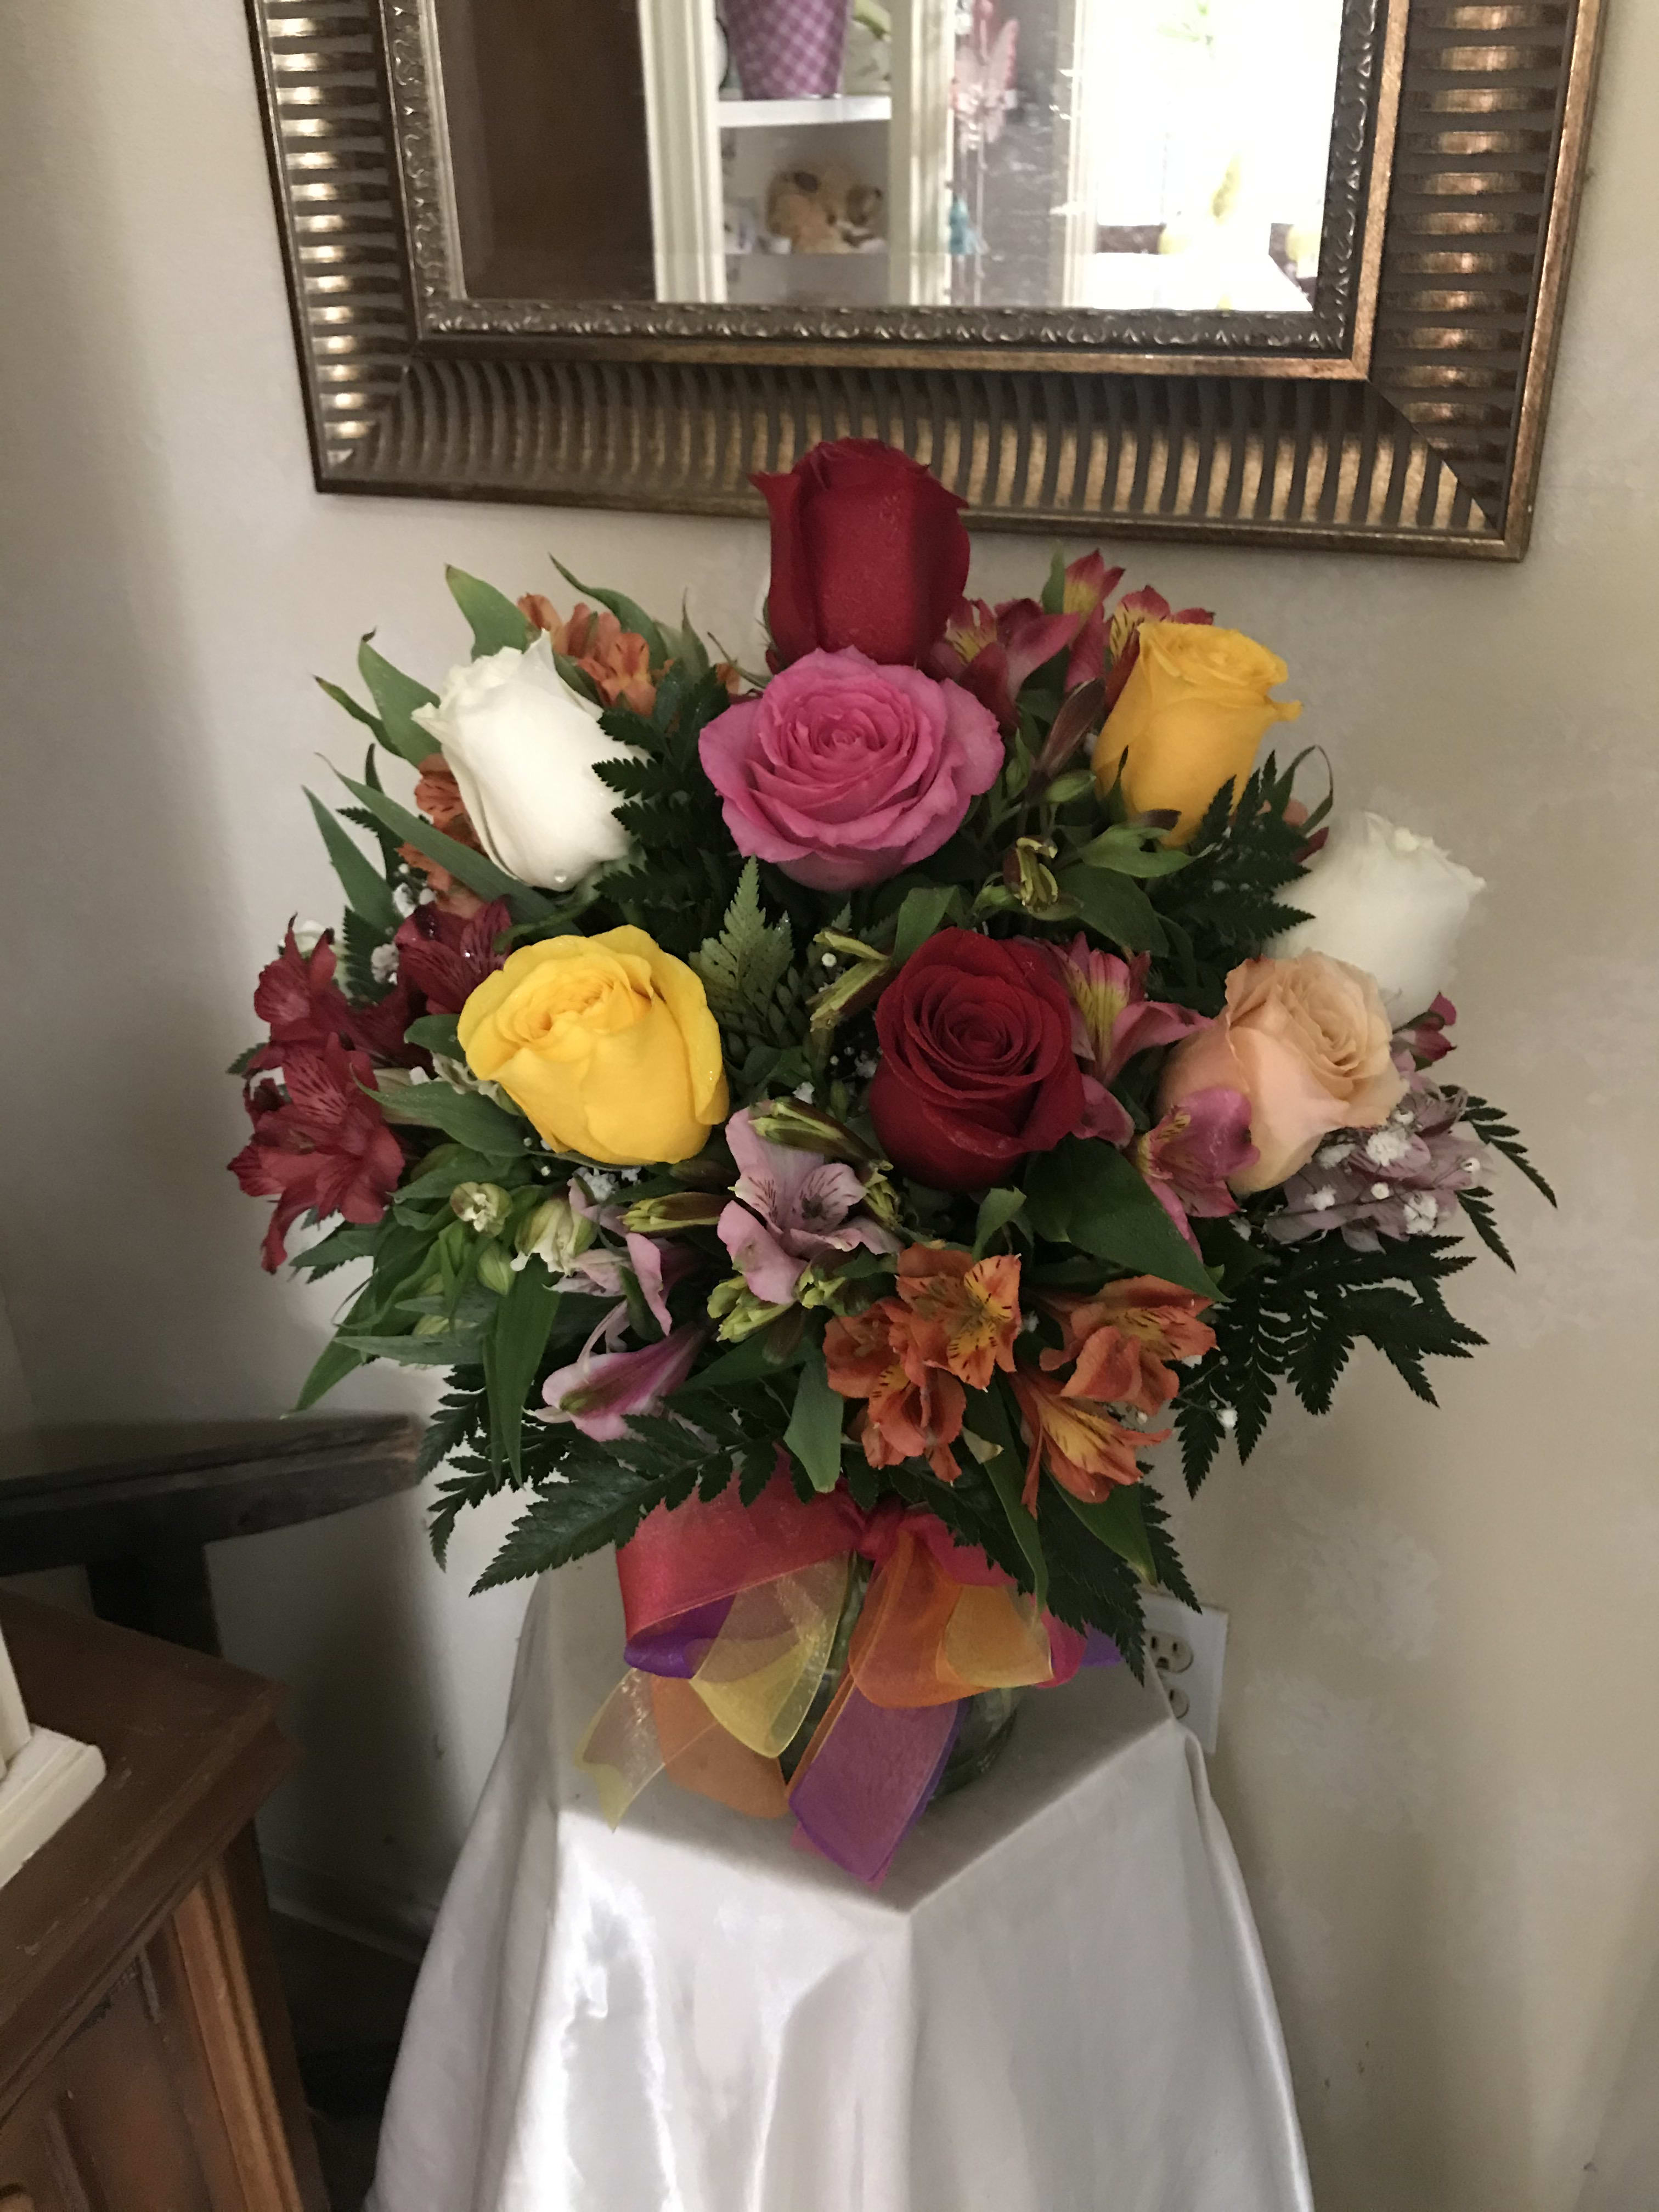 OVER THE RAINBOW - A Rainbow of colors, Perfect For Any Occasion! Ten Vibrant Roses and 10 Alstromeria Lillies arranged in a gathering vase.